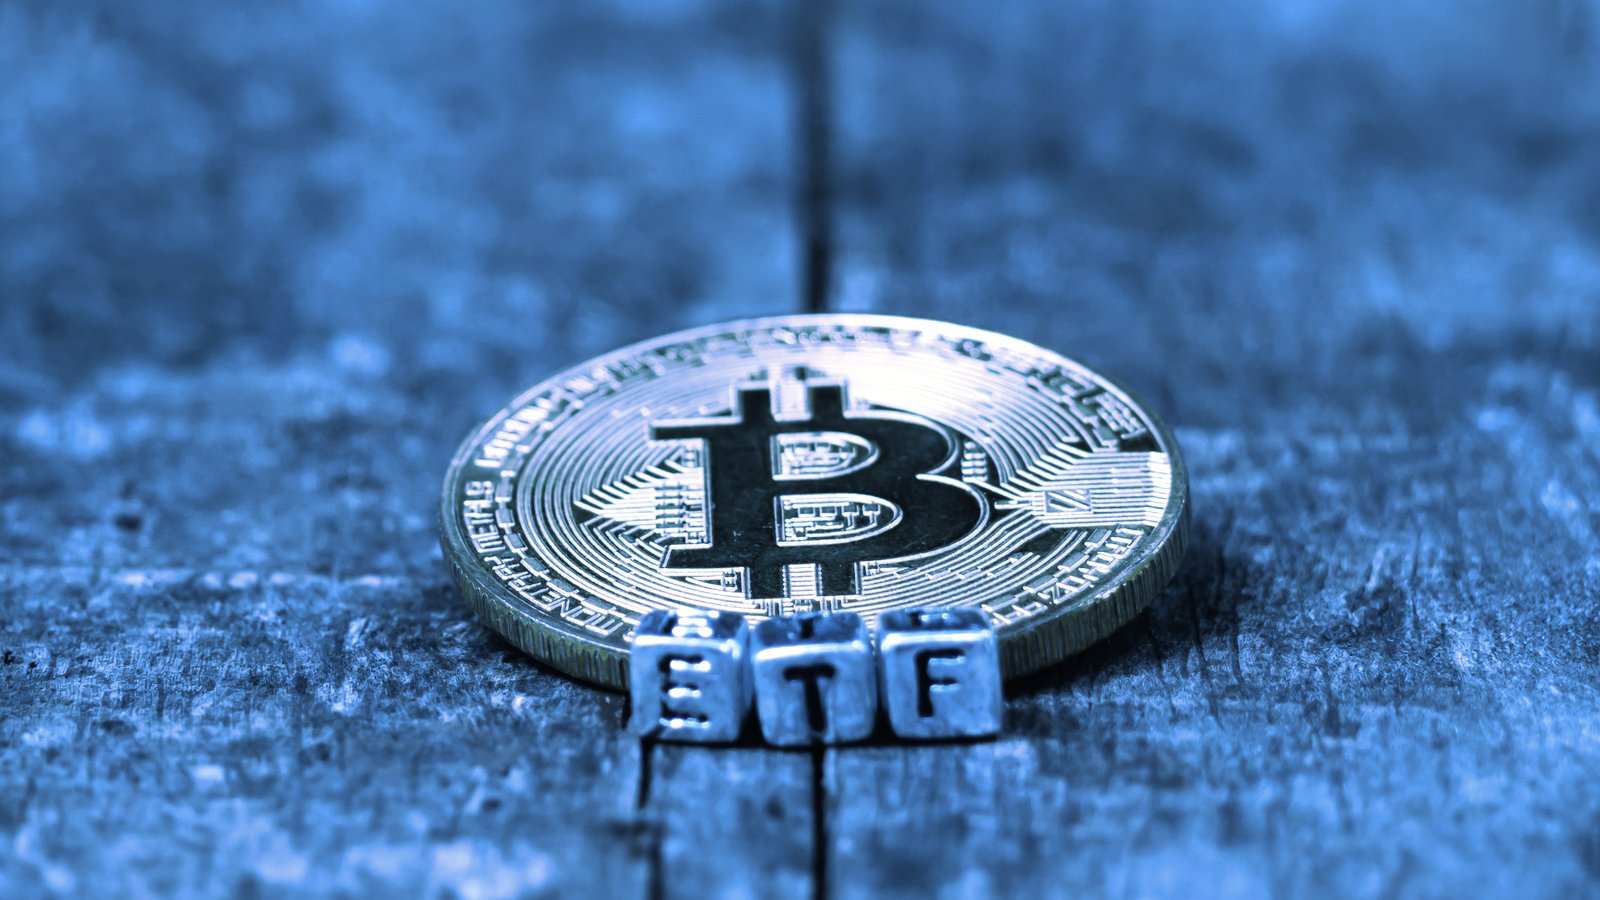 Teucrium Joins List of Bitcoin ETF Hopefuls With Latest Filing